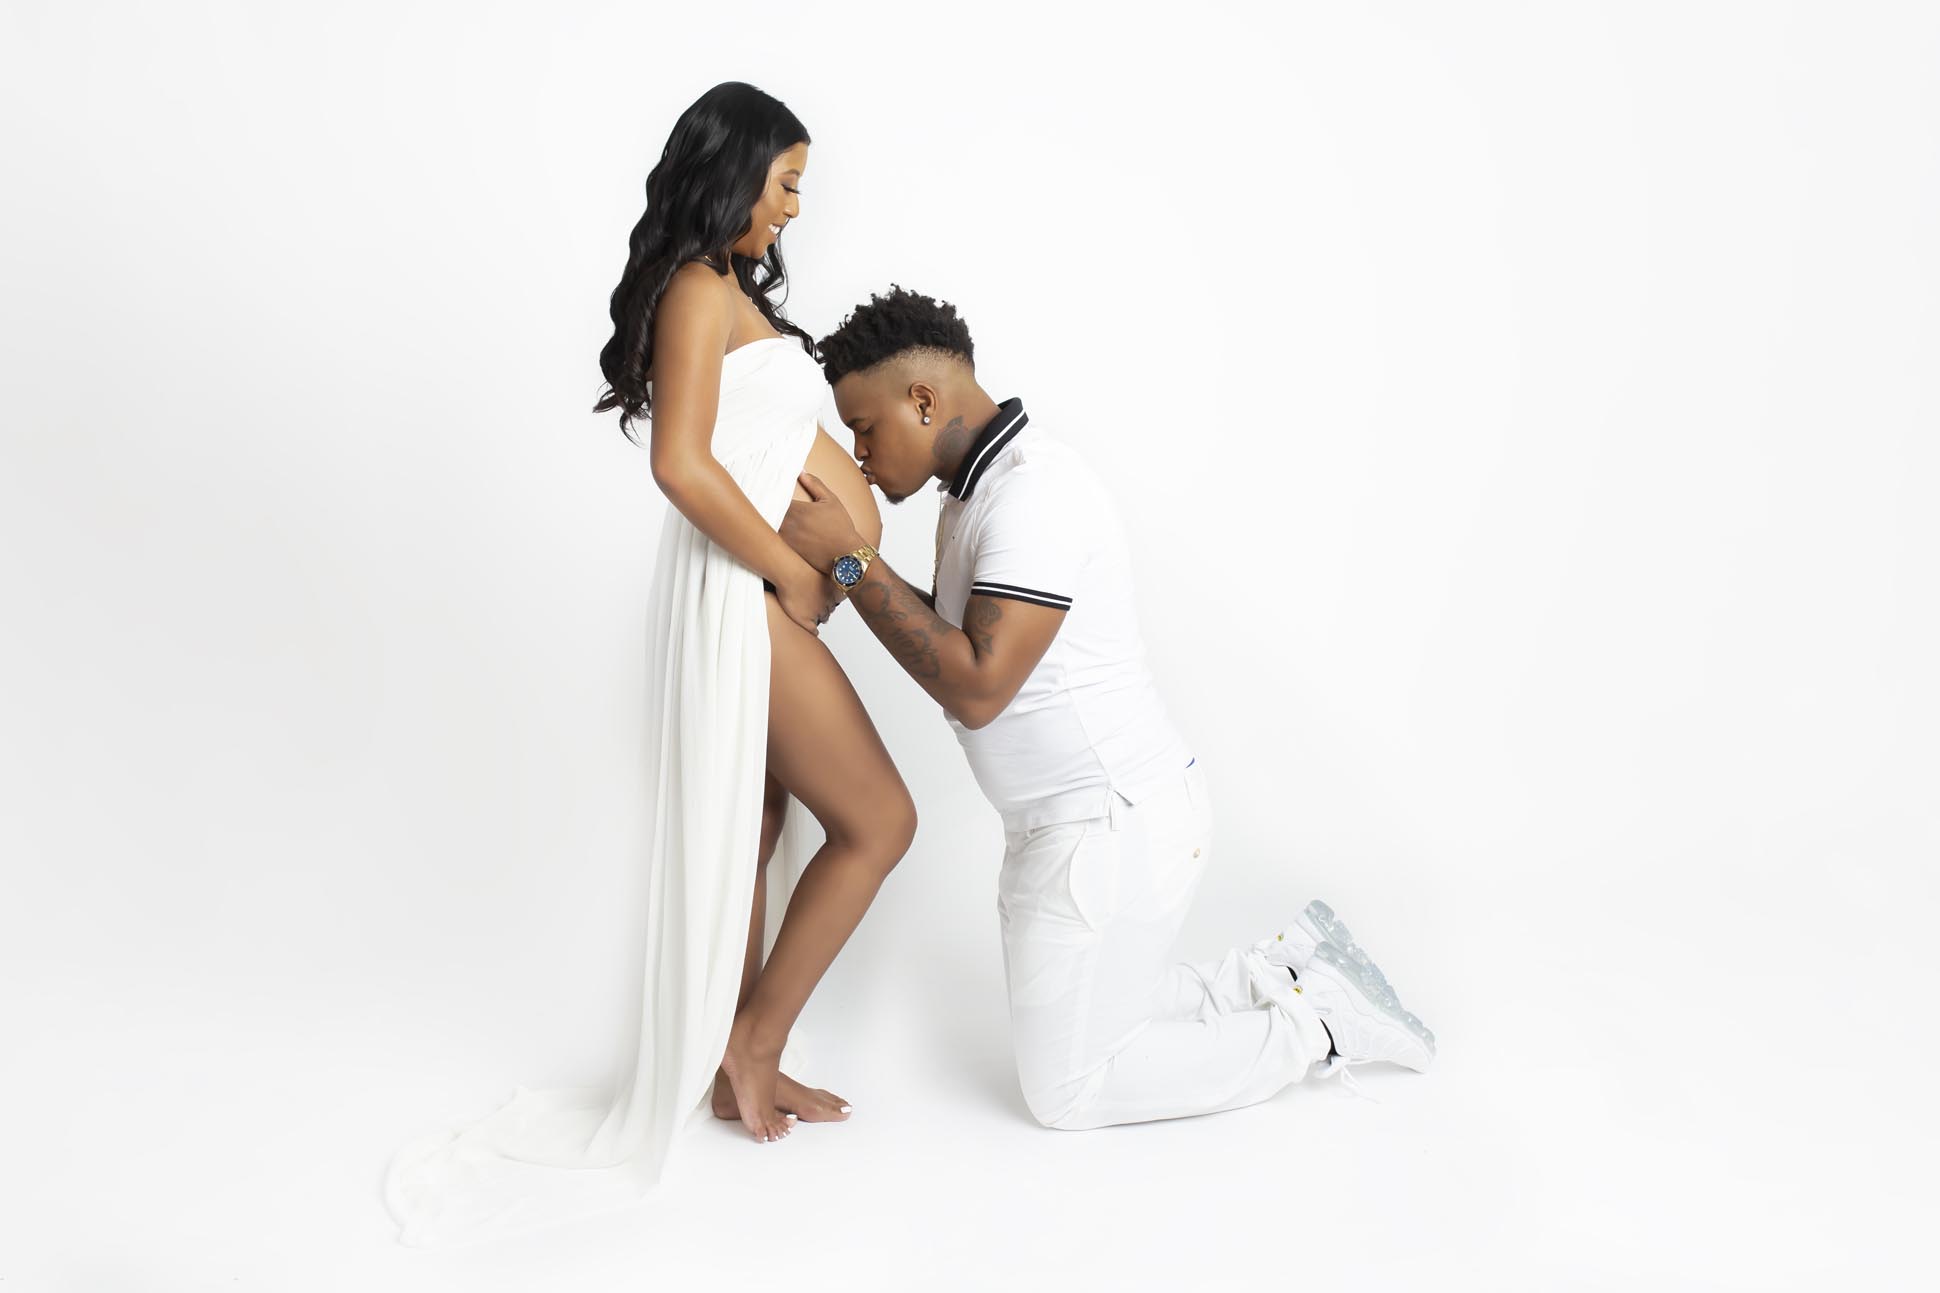 Dallas maternity photographer shares portrait of parents to be wearing all white on a white background dad is kneeling and kissing mom's bared body